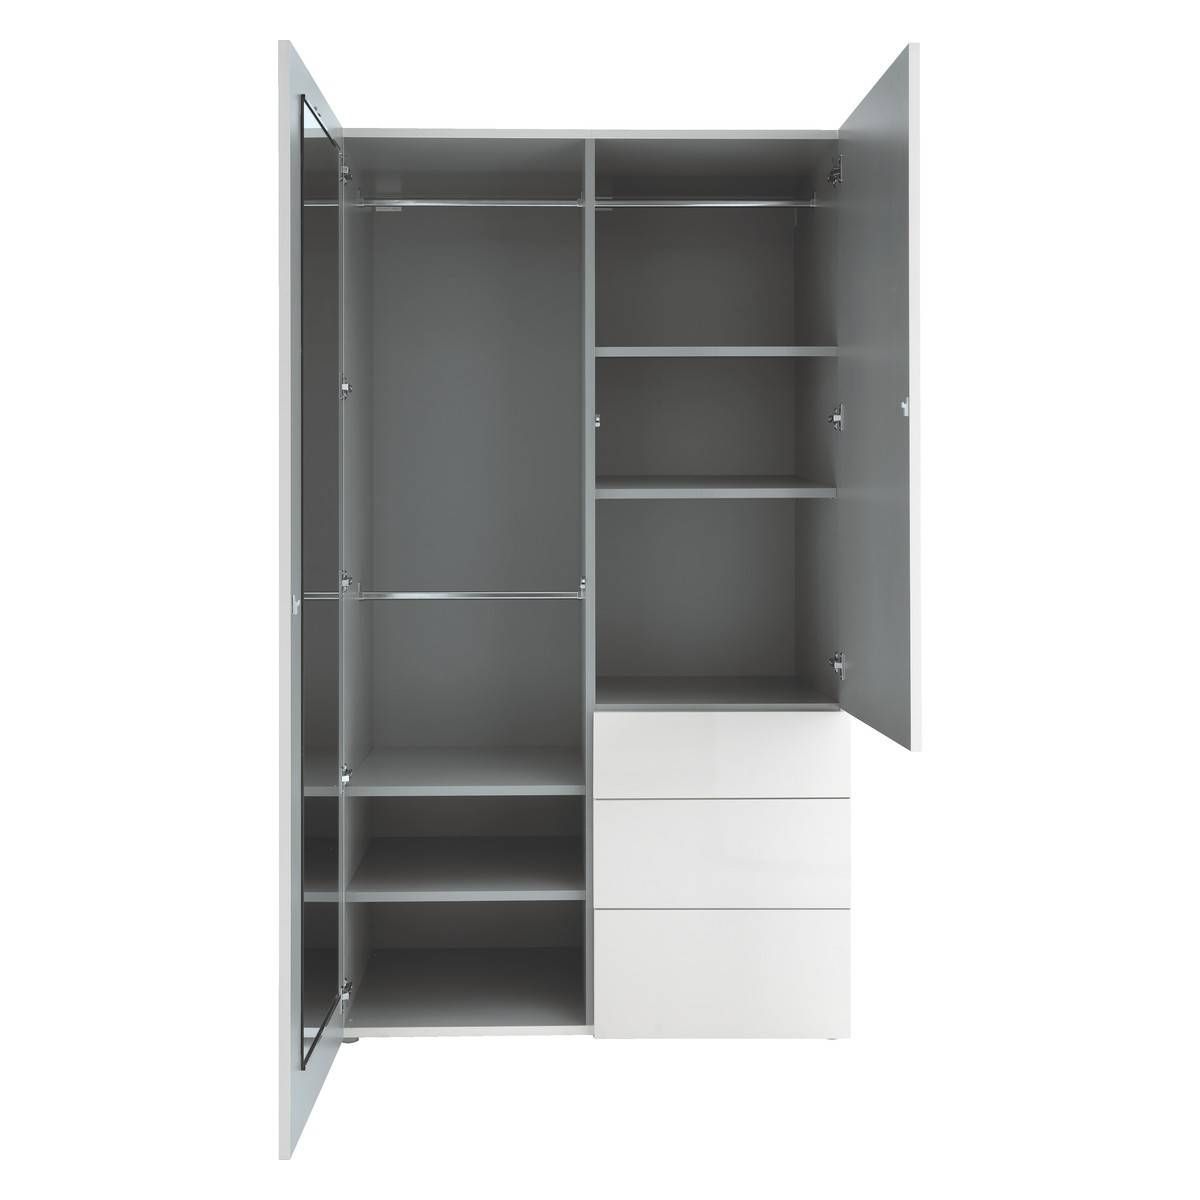 Perouse White 2 Door Wardrobe 120cm Width | Buy Now At Habitat Uk Throughout 2 Door Wardrobe With Drawers And Shelves (View 2 of 30)